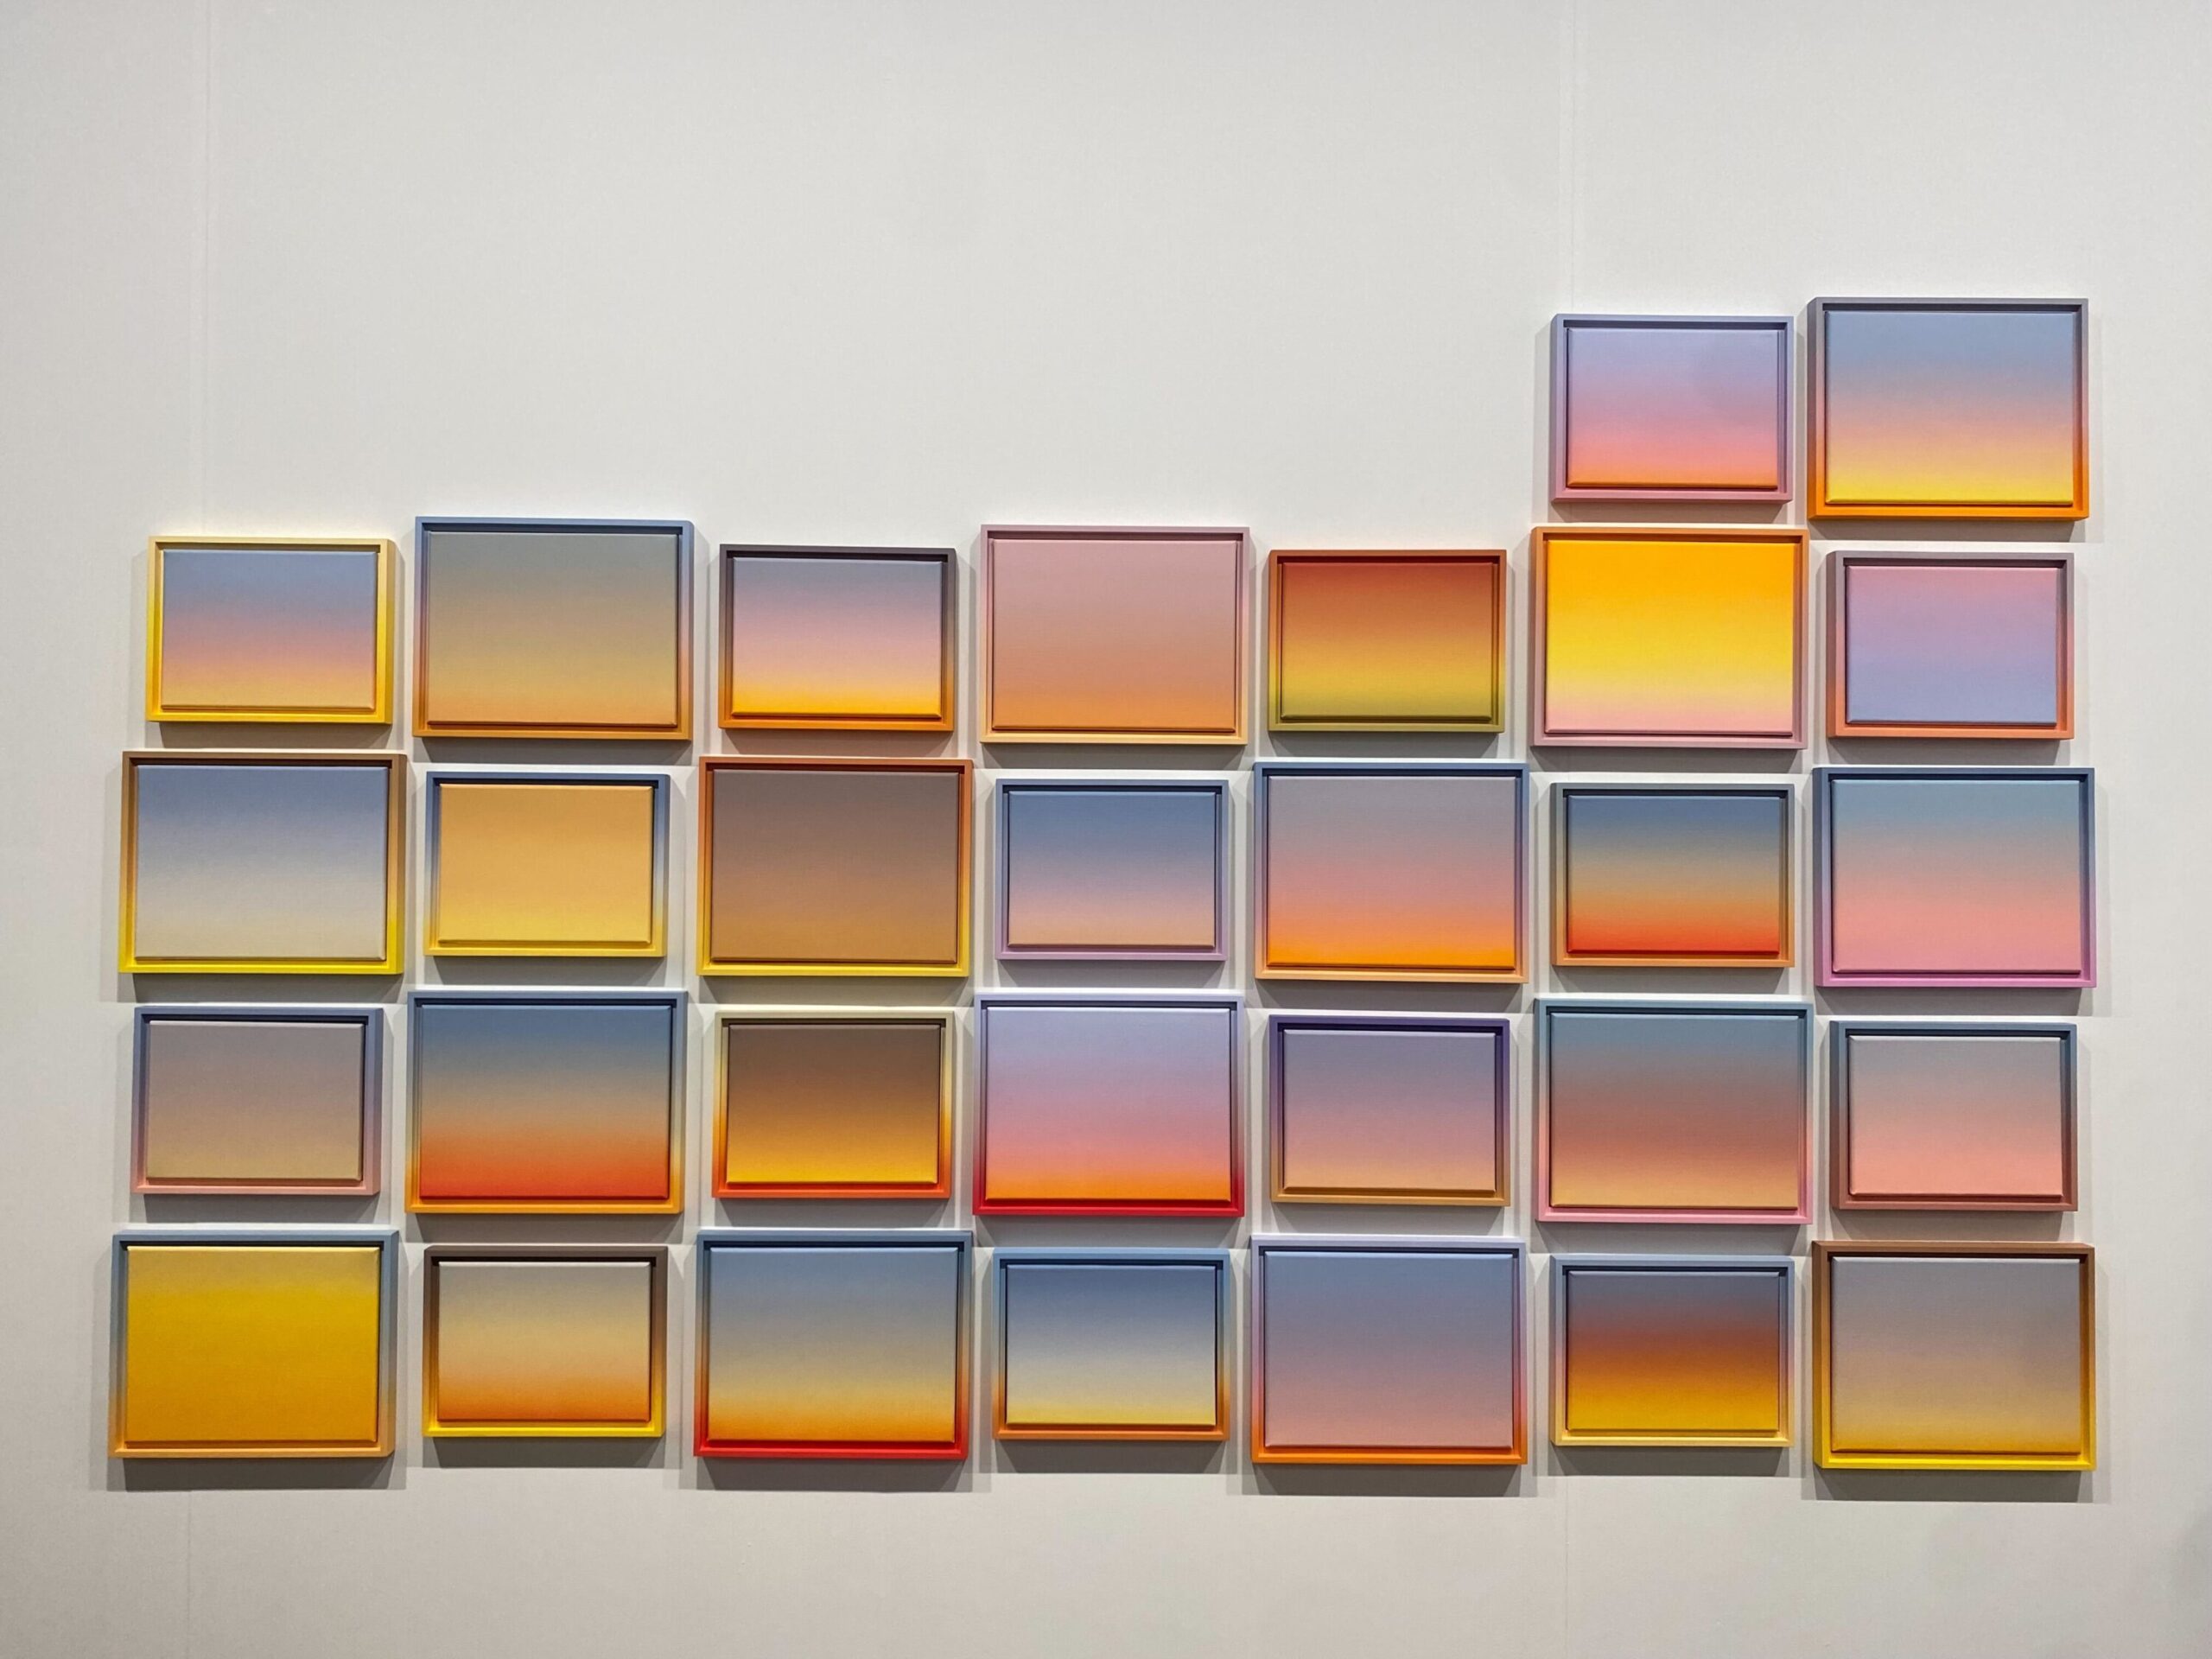 A wall display of 25 framed square pieces, each featuring a gradient of warm colors like yellow, orange, pink, and purple. The arrangement forms an irregular grid pattern, creating a visually striking mosaic effect.